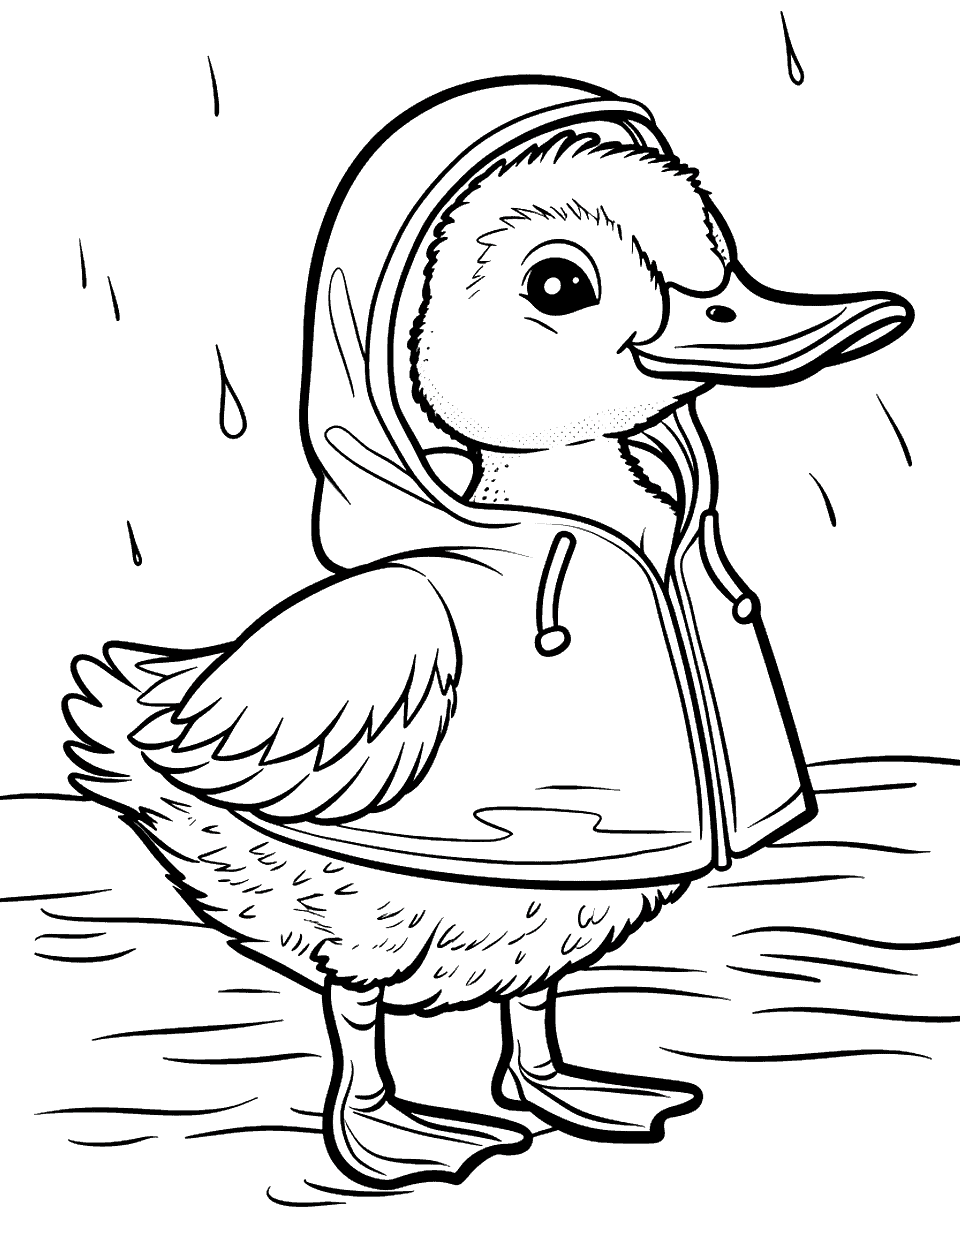 Duck in a Raincoat Coloring Page - A cute duck wearing a raincoat in the rain.